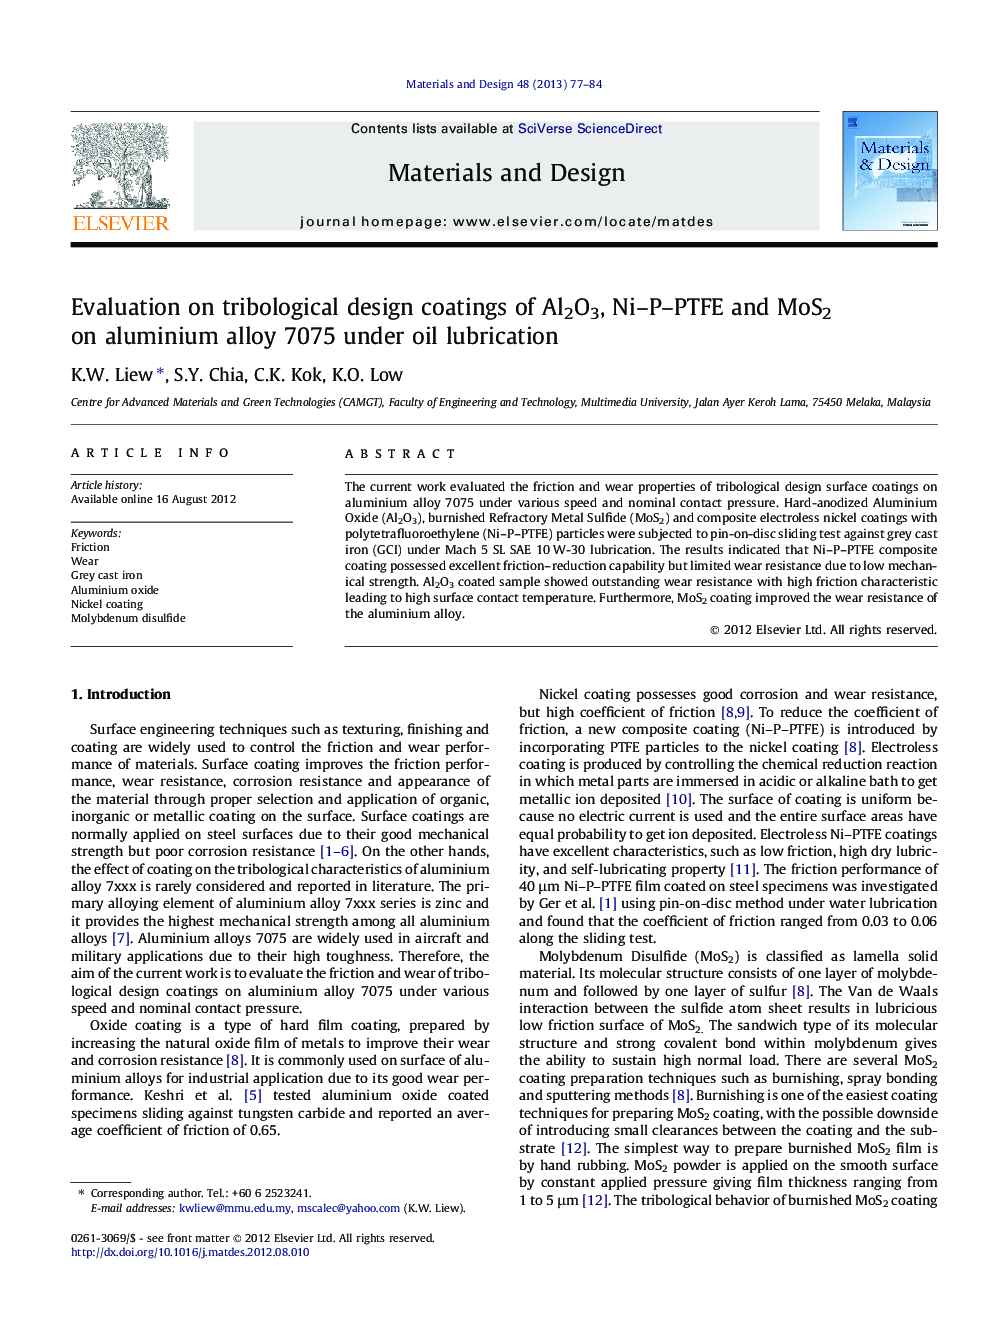 Evaluation on tribological design coatings of Al2O3, Ni–P–PTFE and MoS2 on aluminium alloy 7075 under oil lubrication